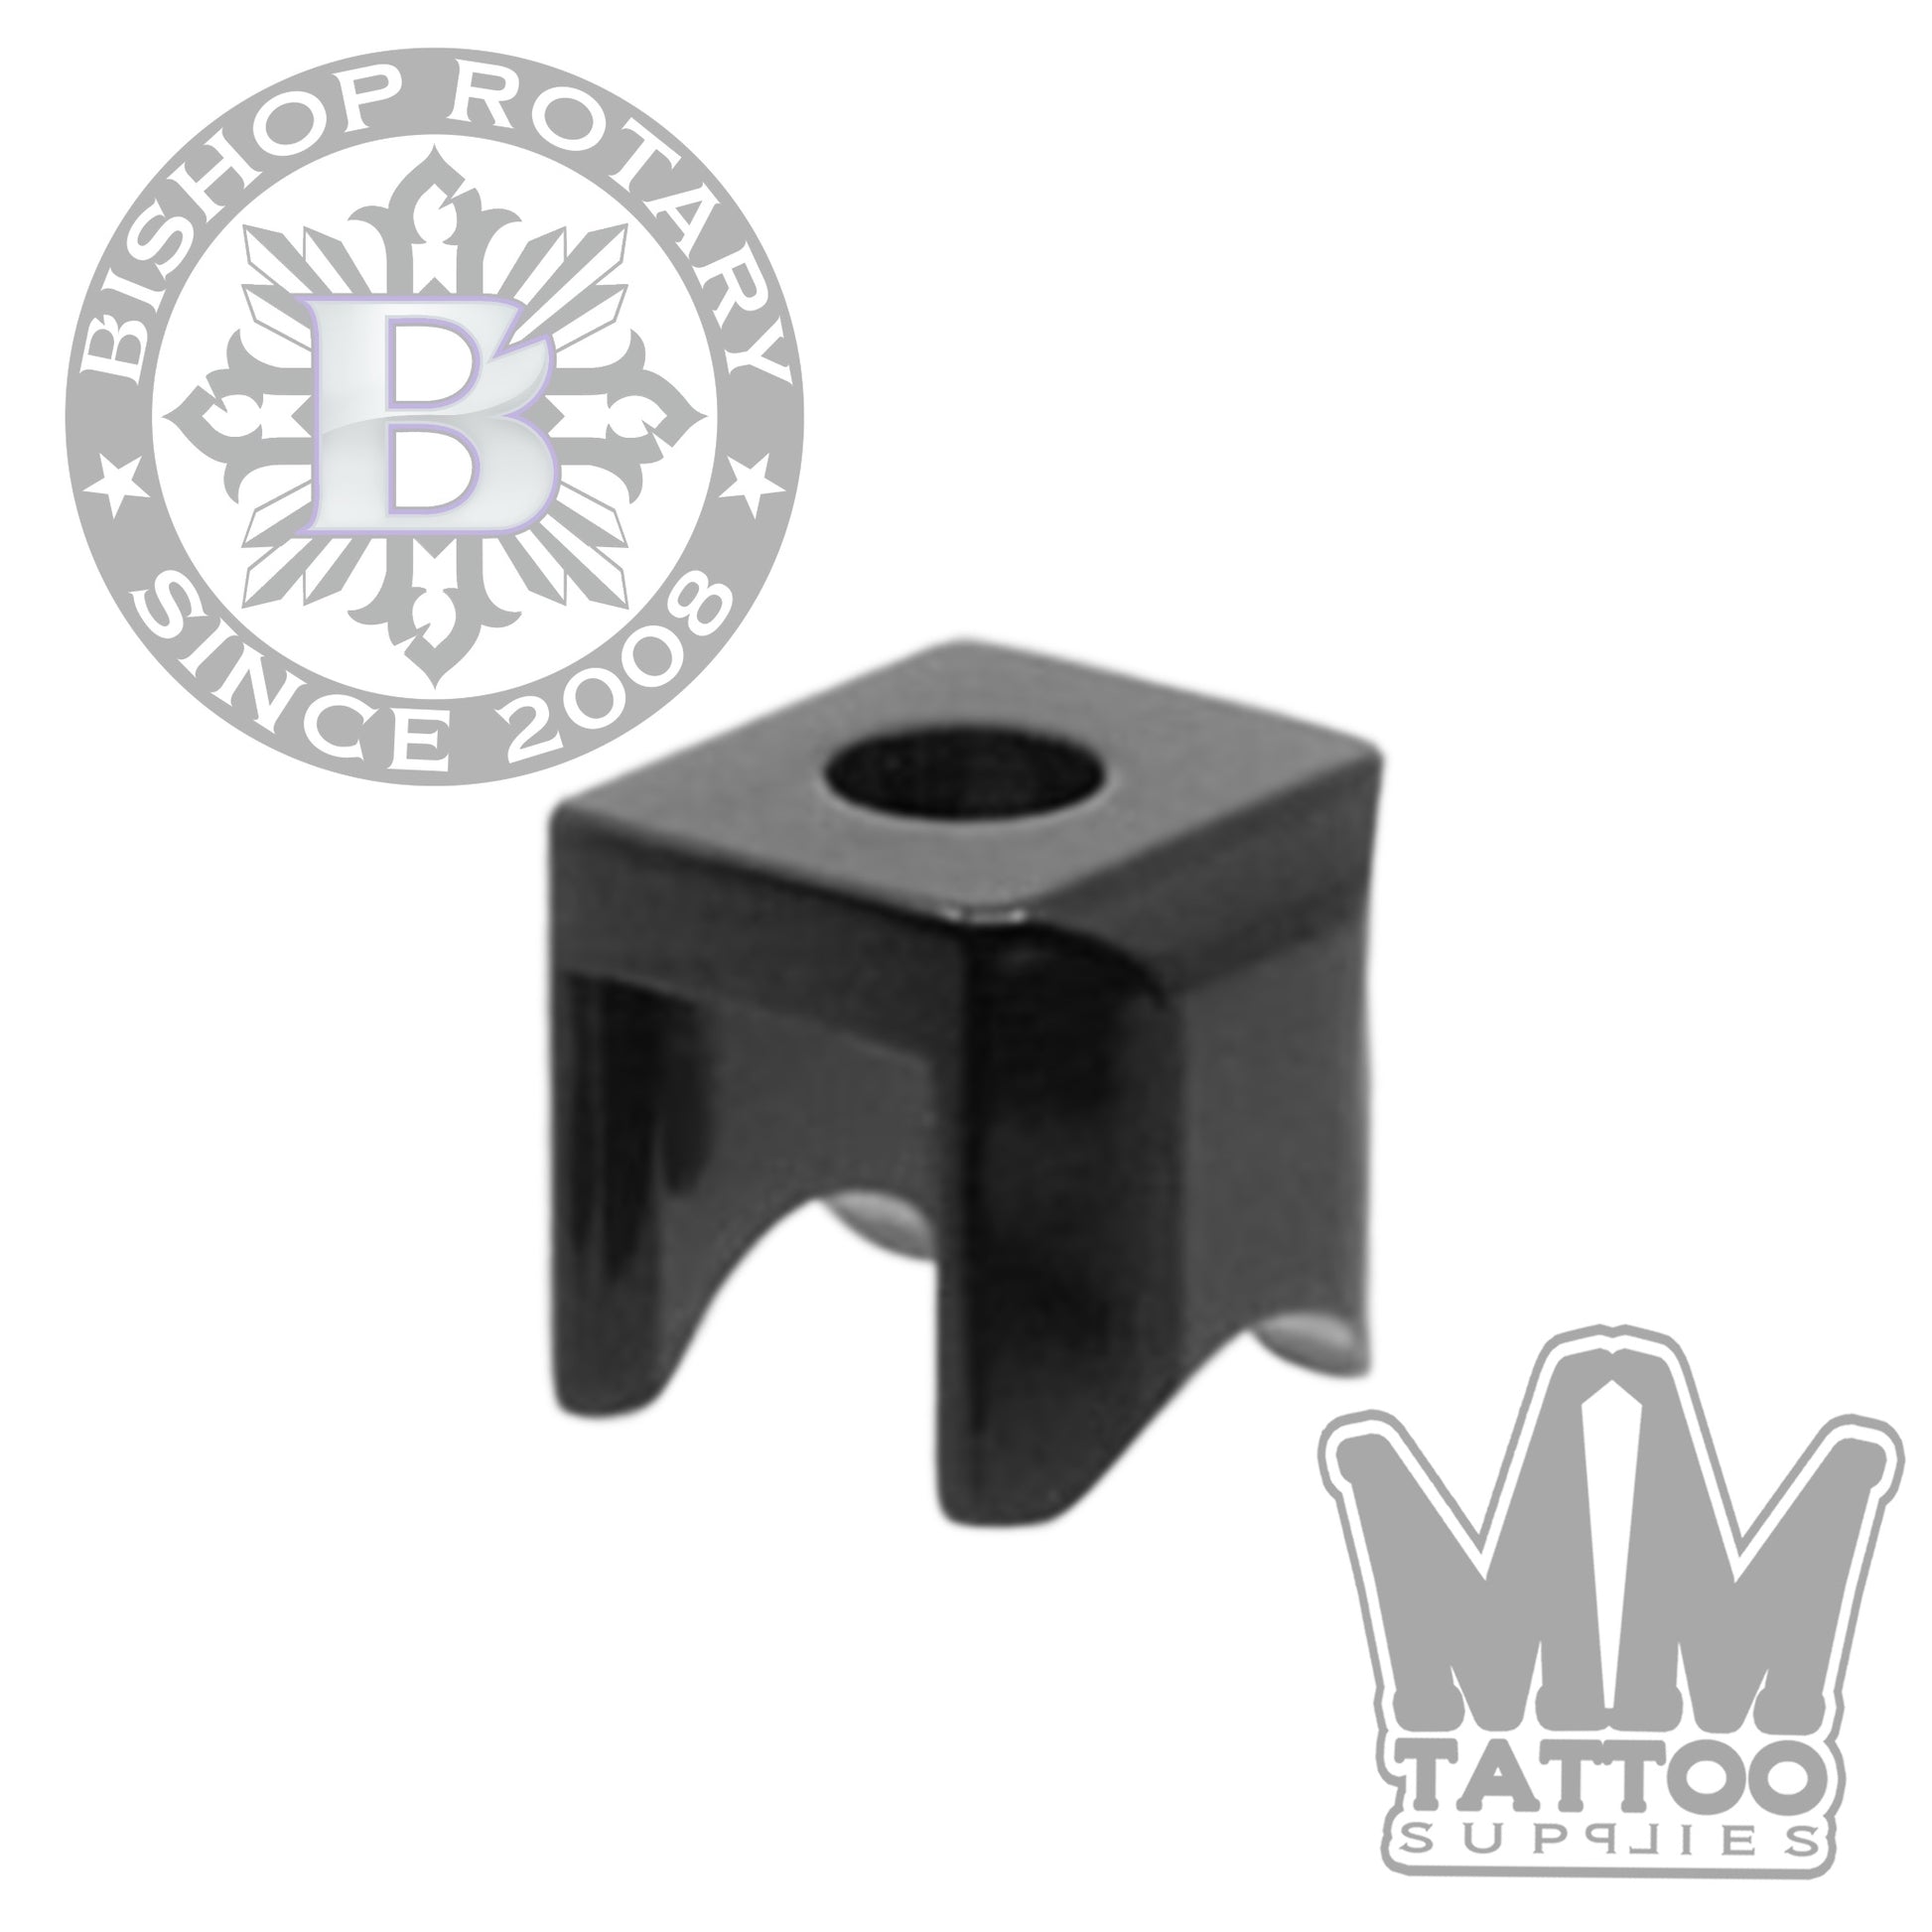 Bishop clamp for v6 - mmtattoo supplies